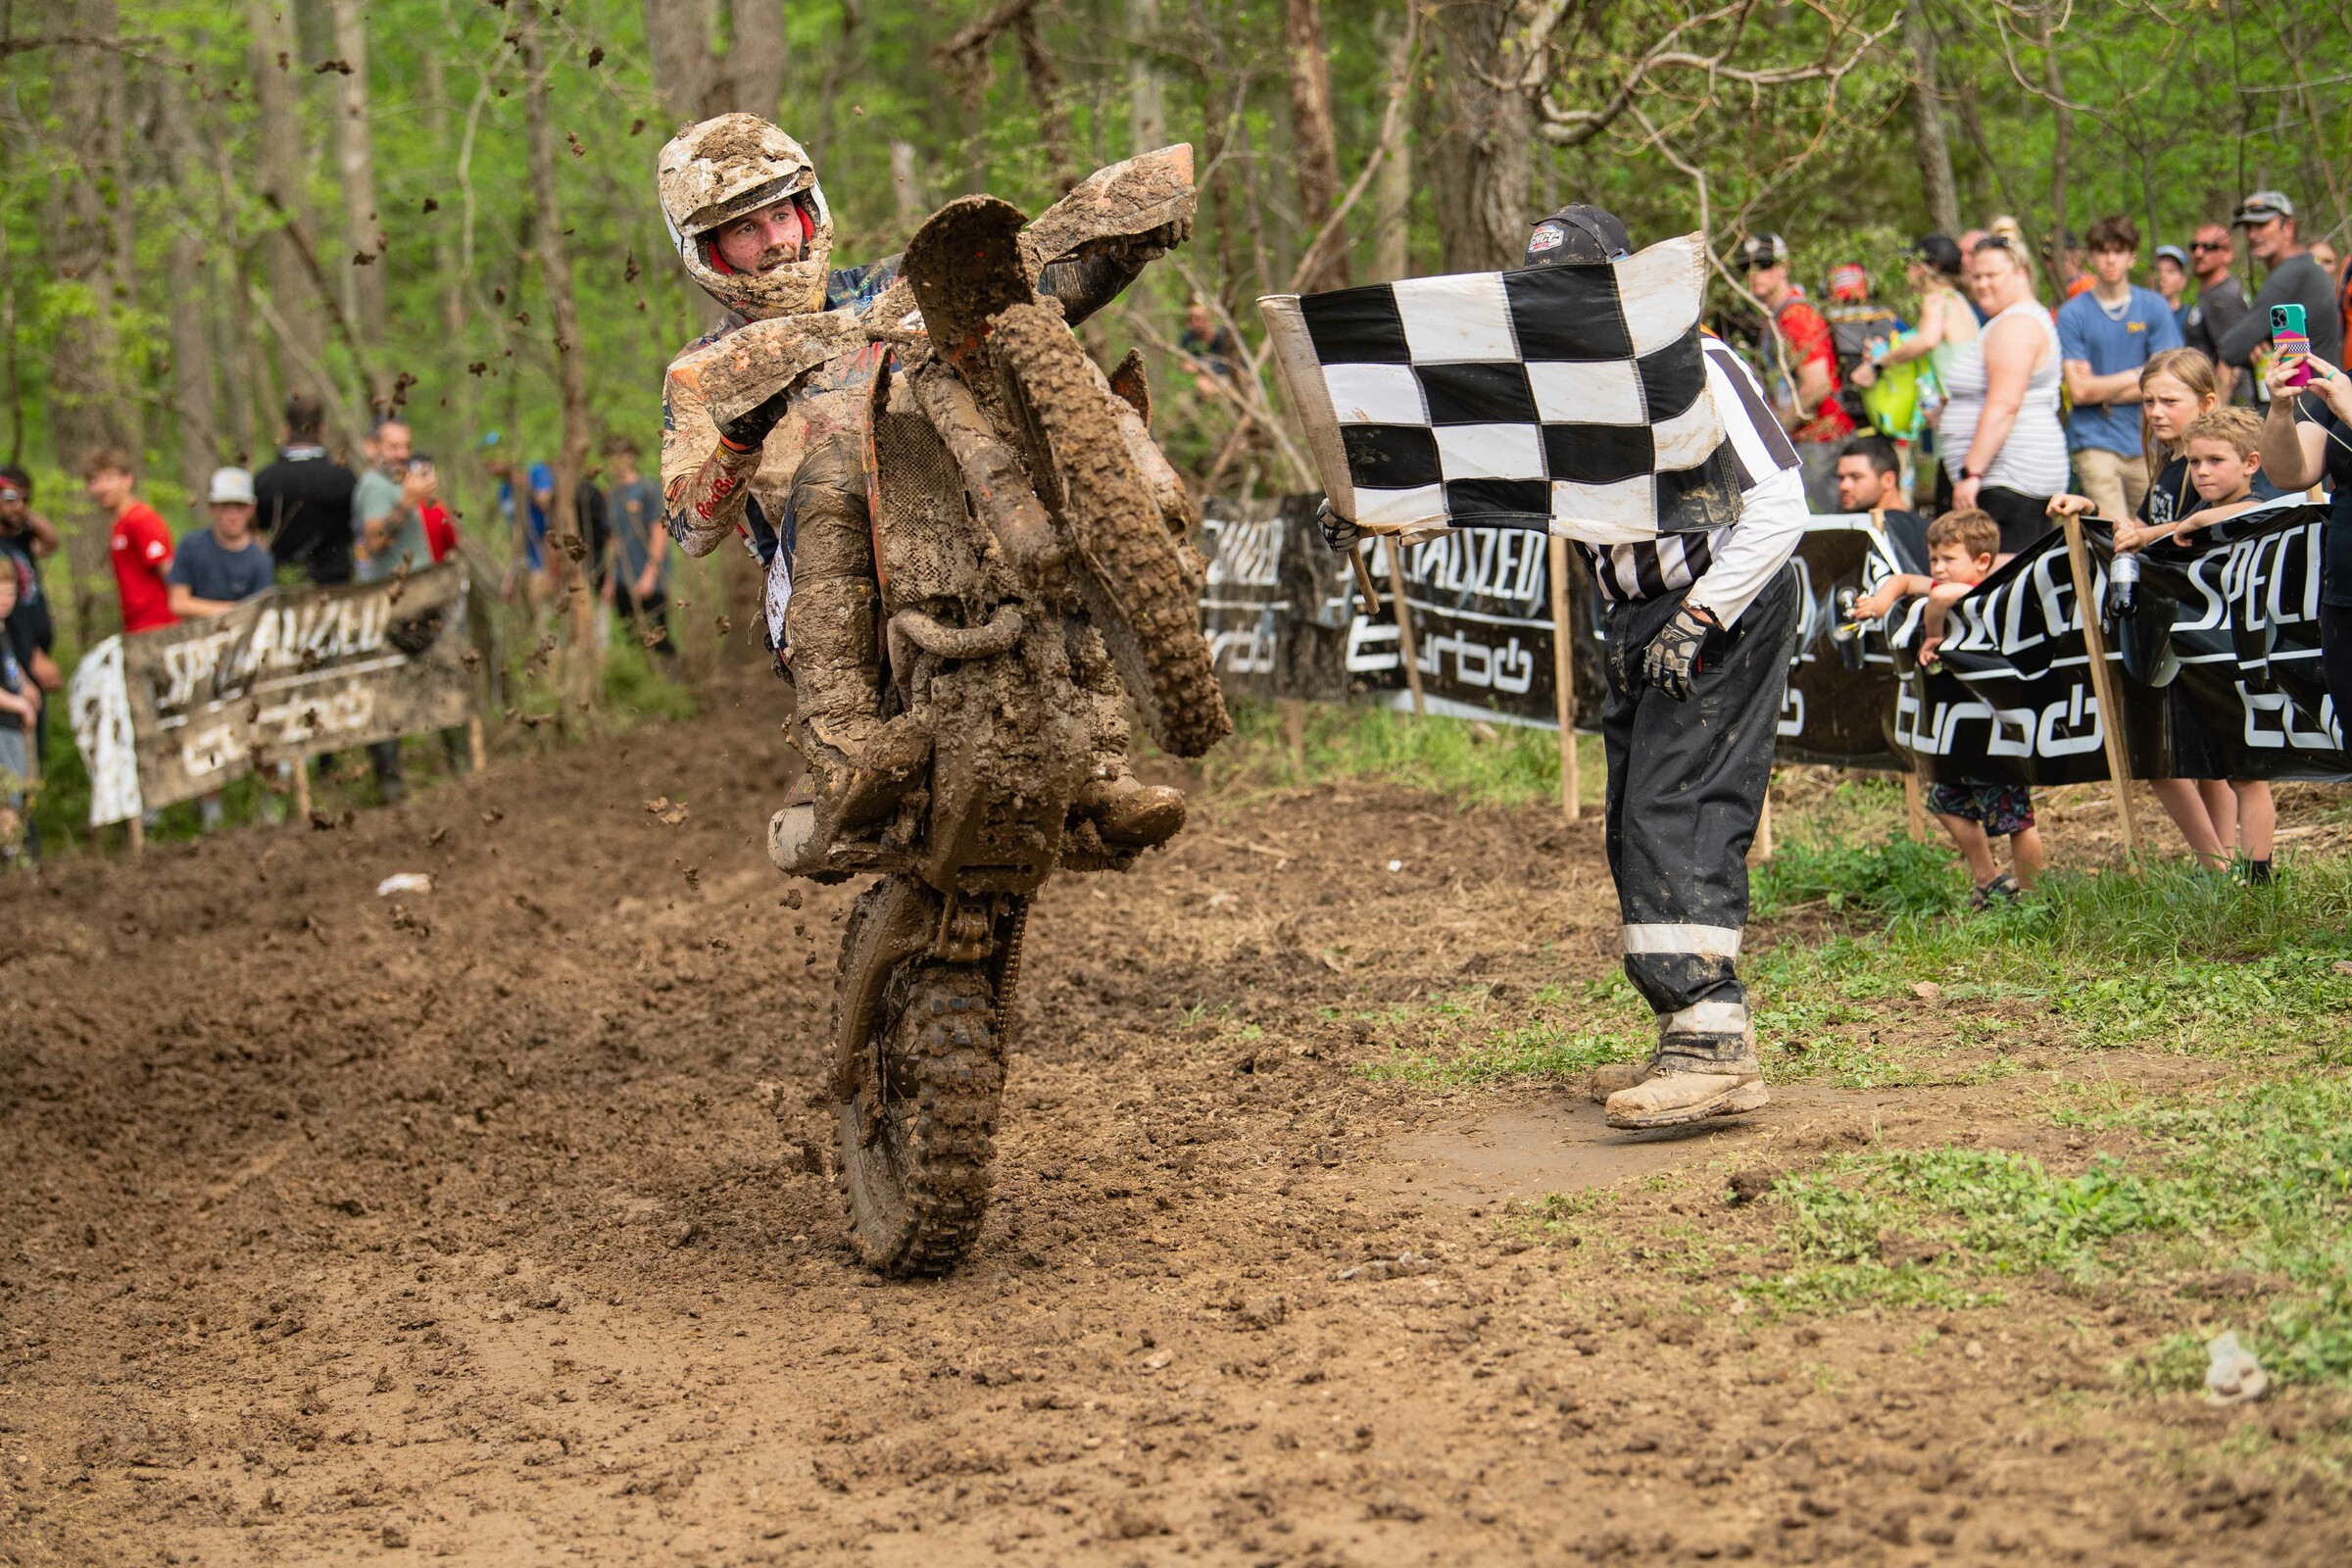 Make That Six Different Winners in the First Six GNCC Rounds!